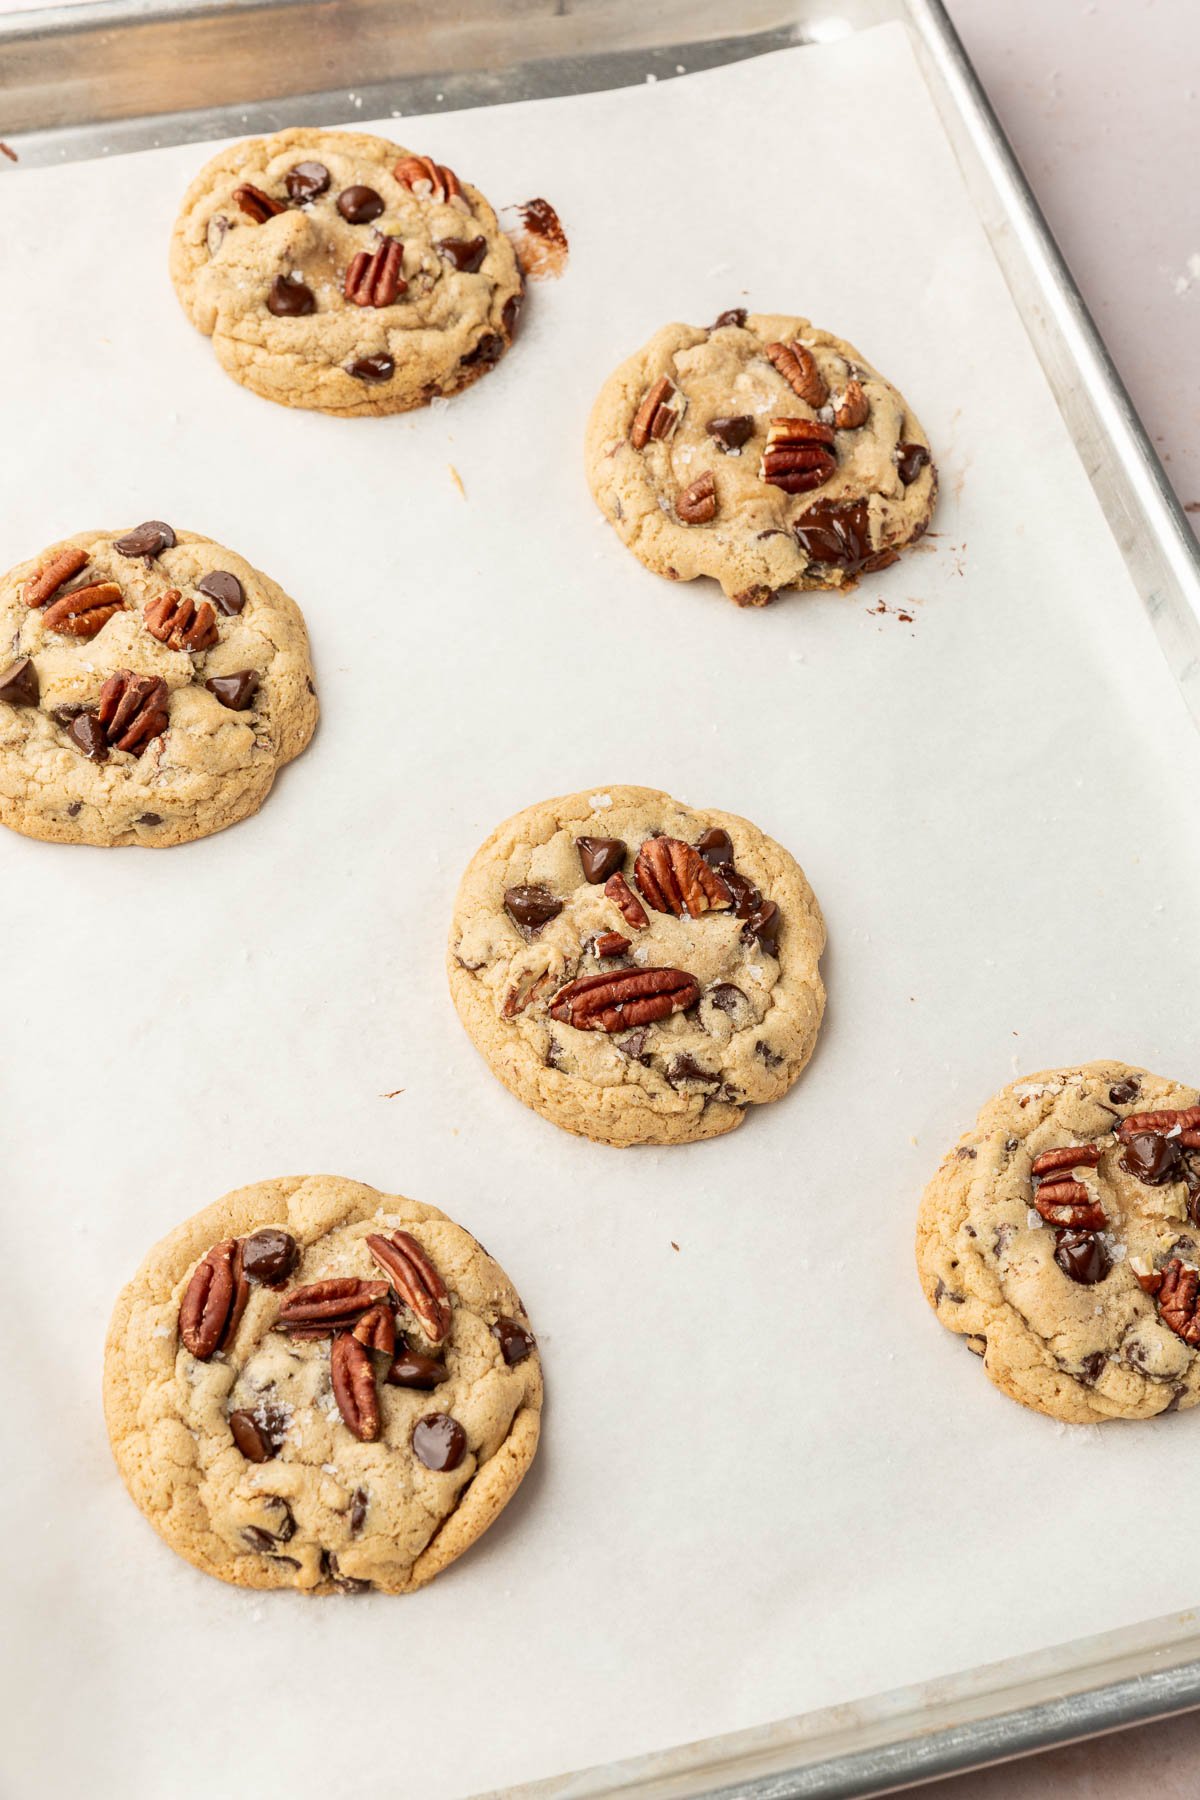 Six gluten-free pecan chocolate chip cookies on a baking sheet lined with parchment paper.